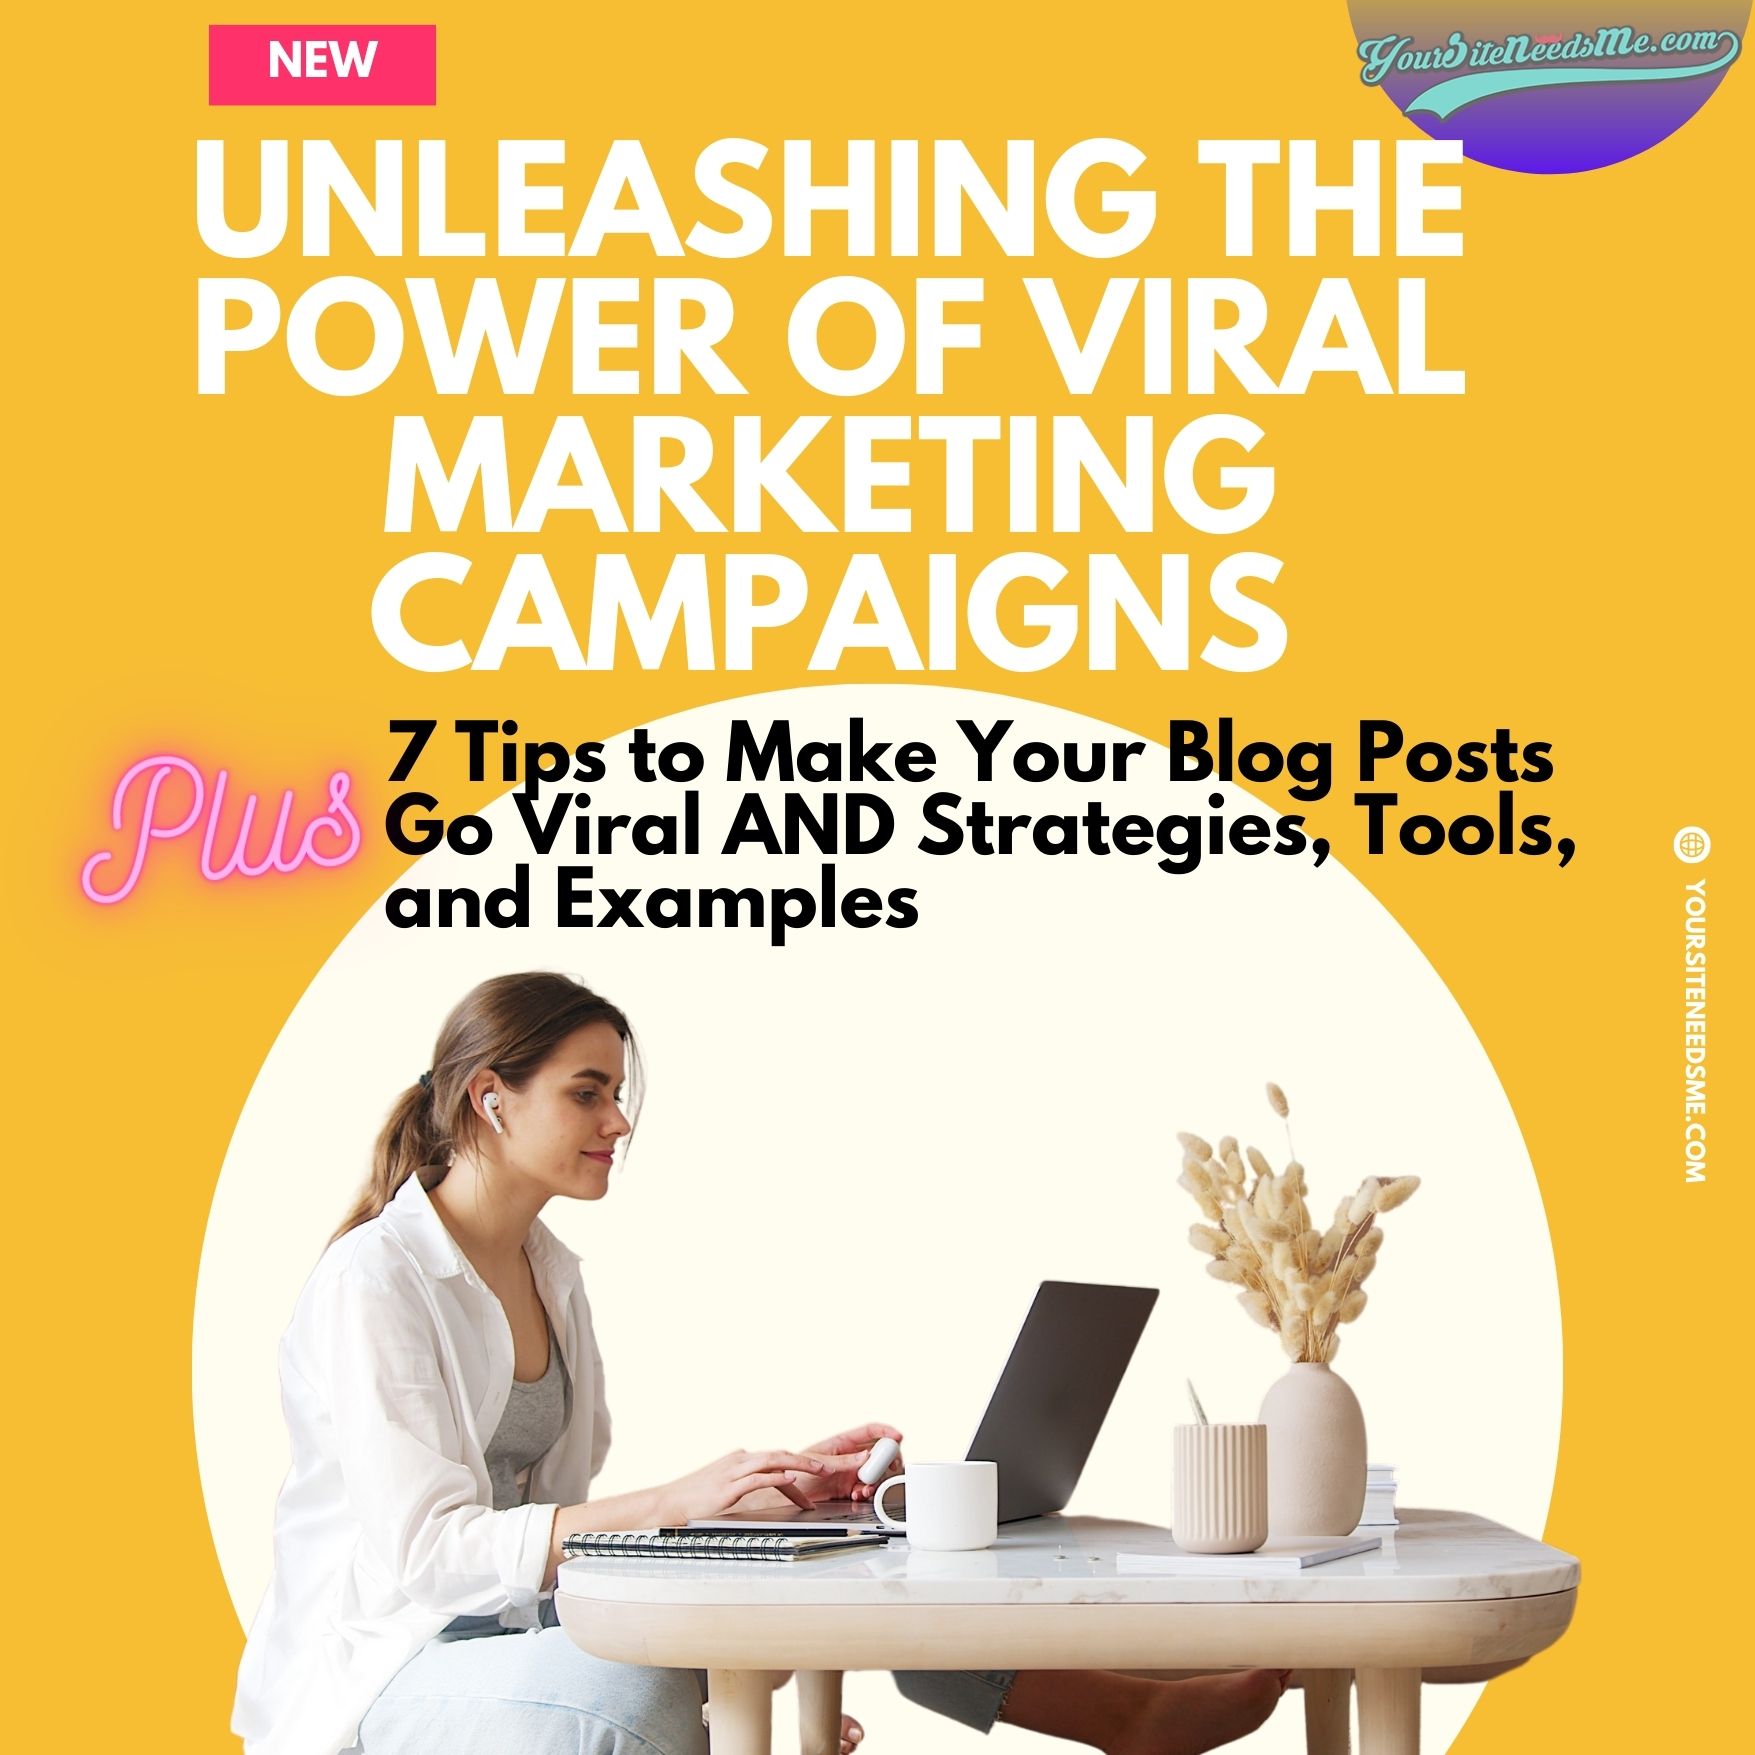 Unleashing the Power of Viral Marketing Campaigns 7 Tips to Make Your Blog Posts Go Viral AND Strategies, Tools, and Examples